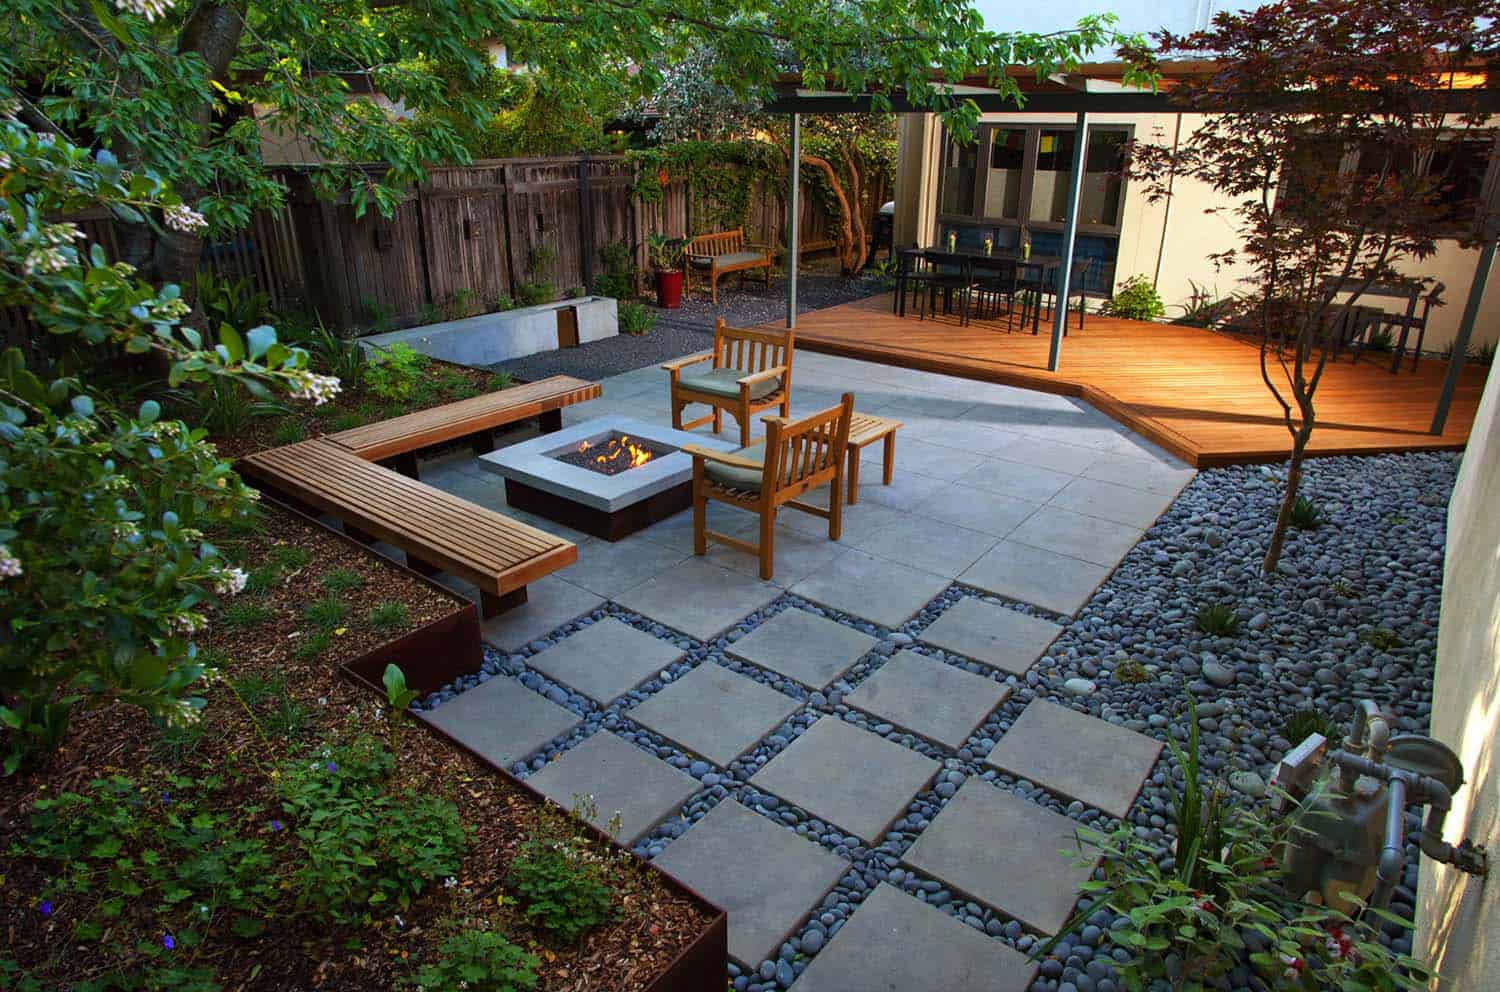 28 Inspiring Fire Pit Ideas To Create A, Square Fire Pit Ideas For Backyard